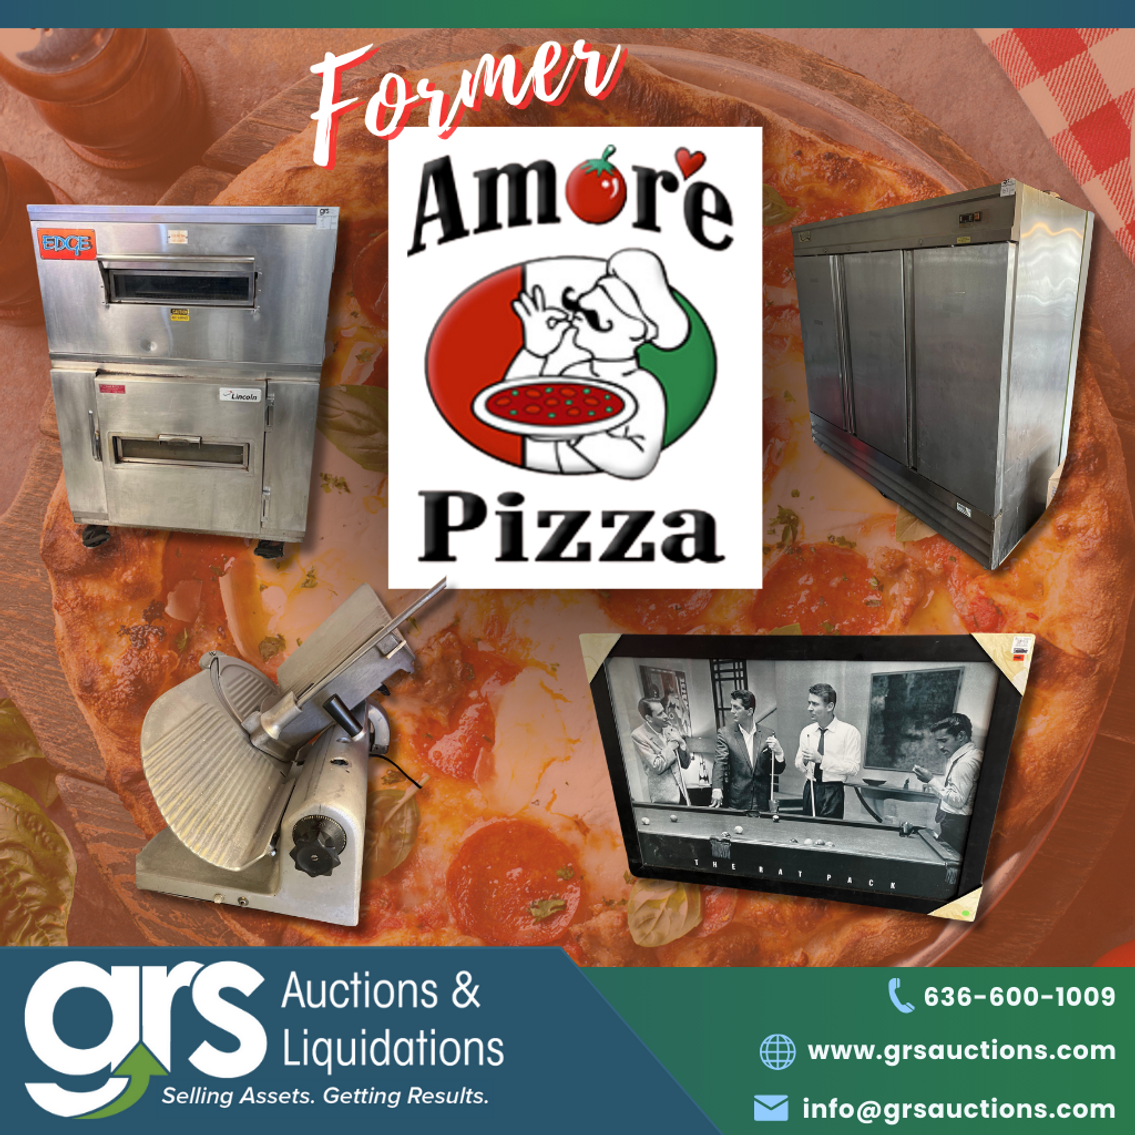 Former Amore Pizza